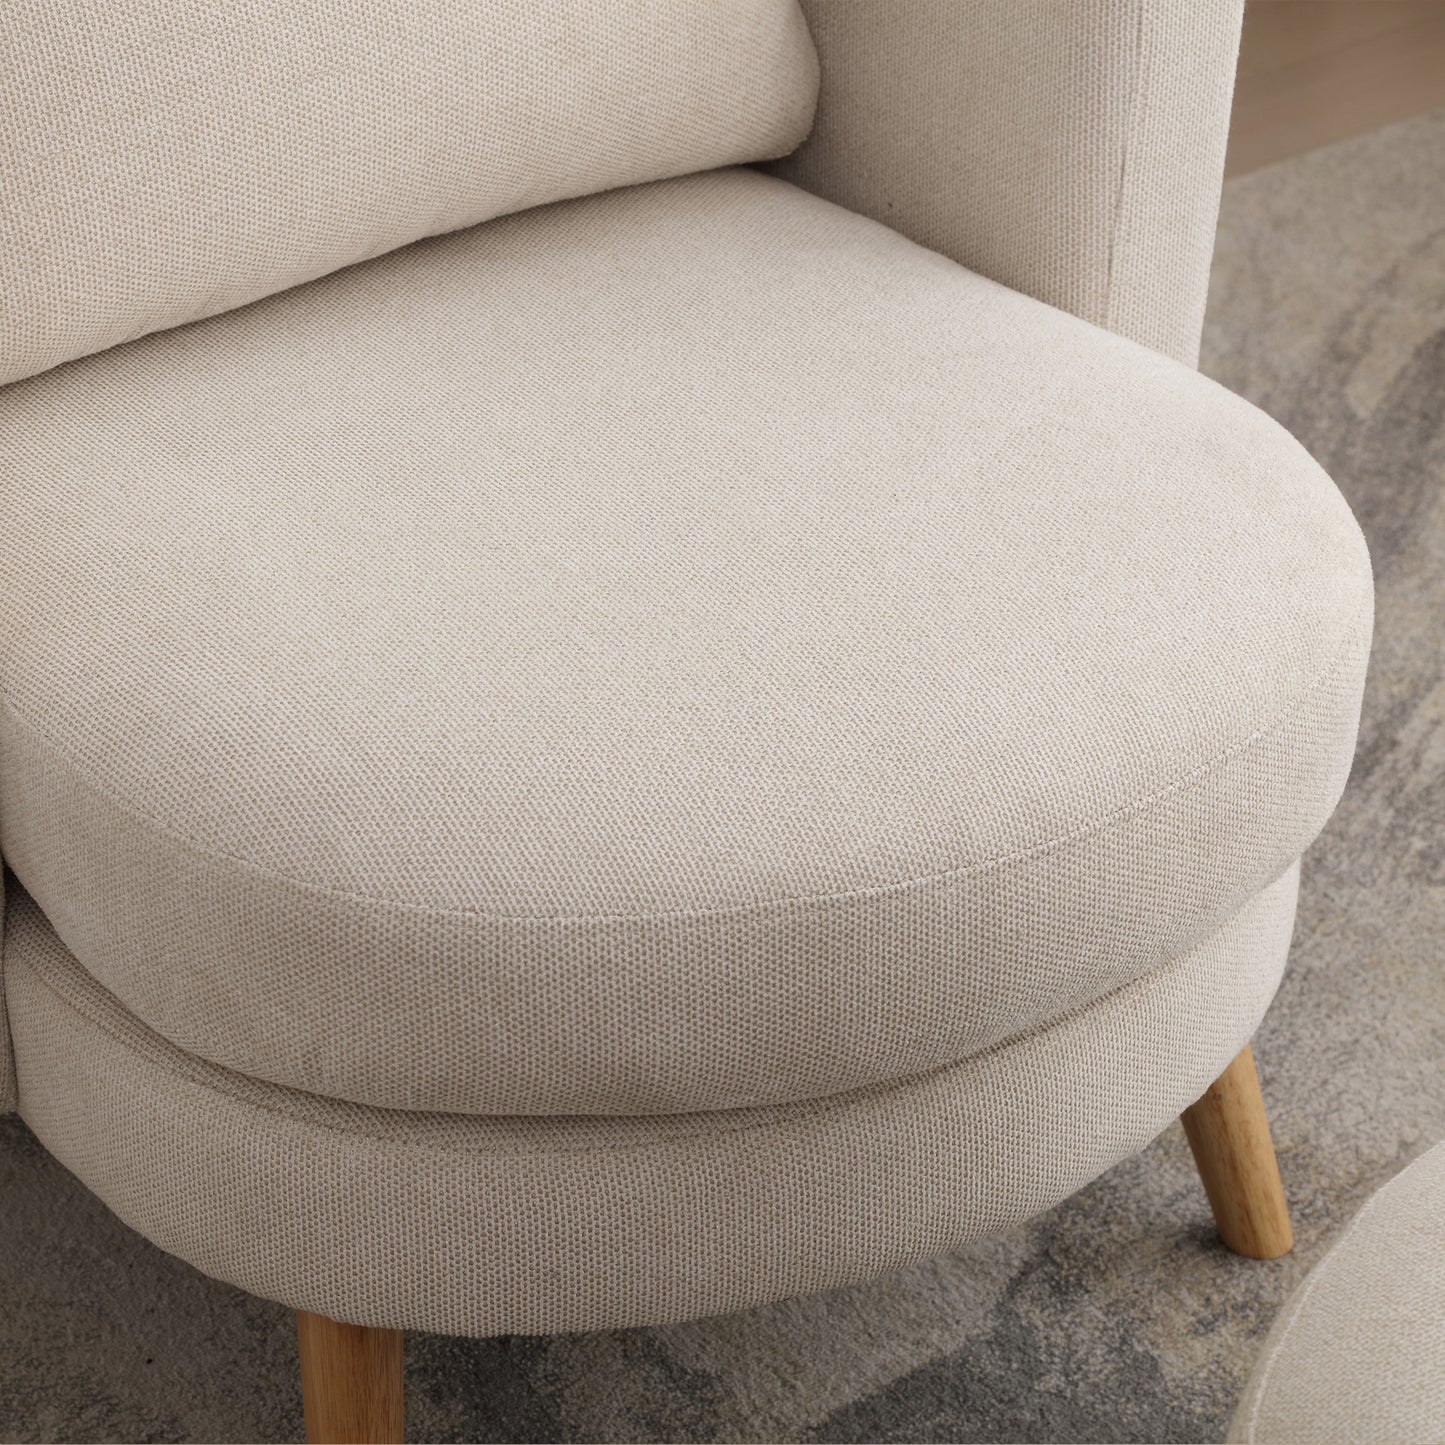 Benson Beige Accent Chair with Ottoman